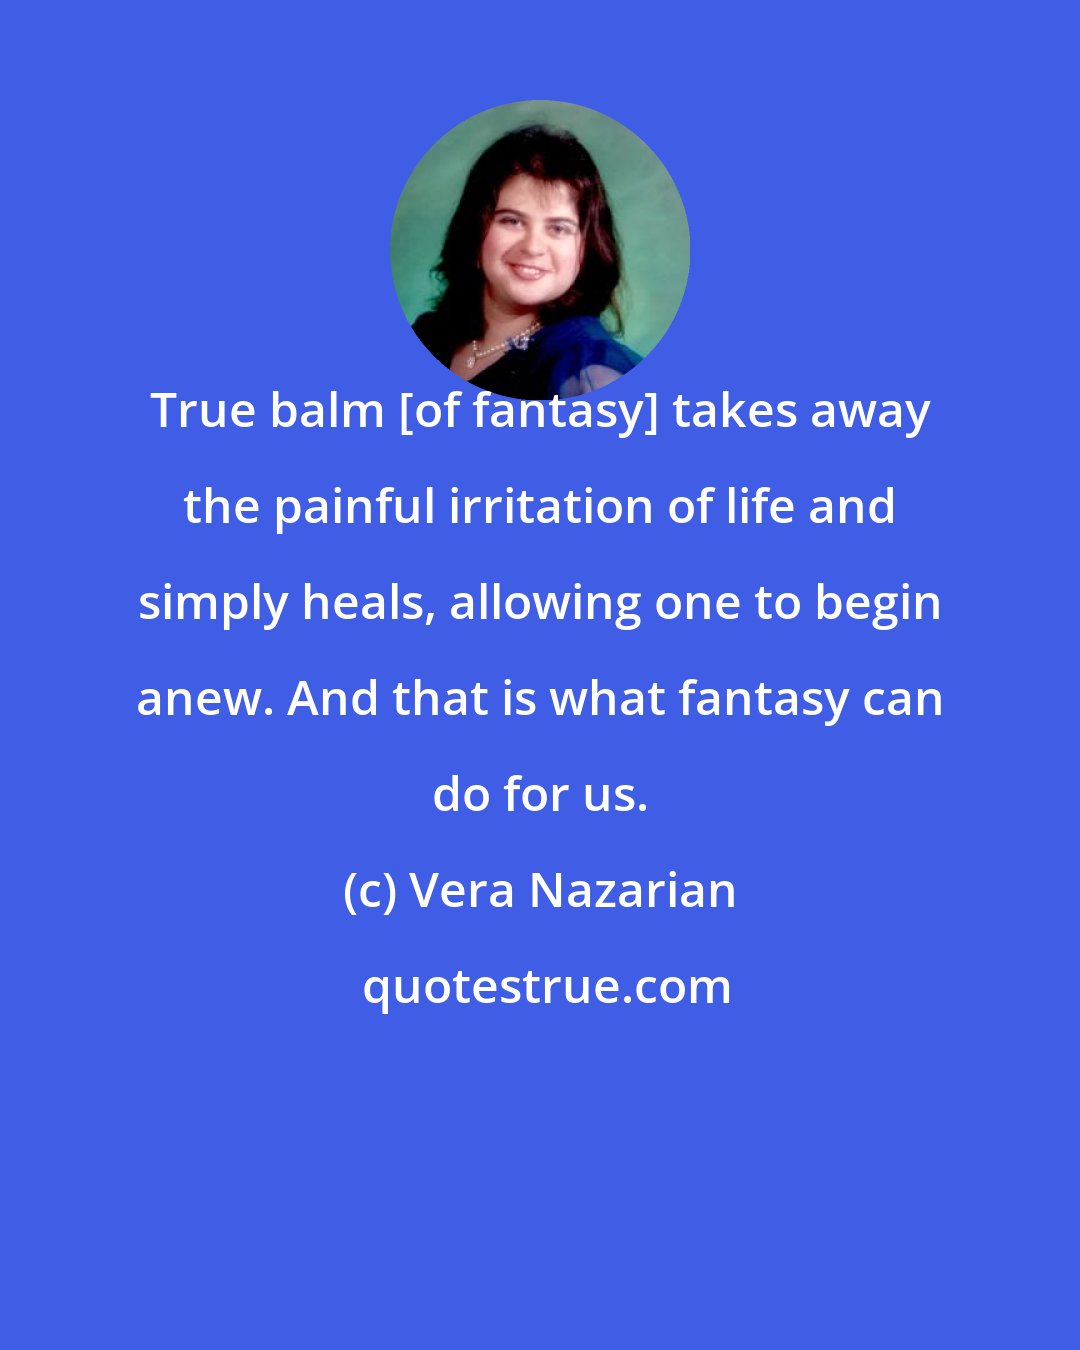 Vera Nazarian: True balm [of fantasy] takes away the painful irritation of life and simply heals, allowing one to begin anew. And that is what fantasy can do for us.